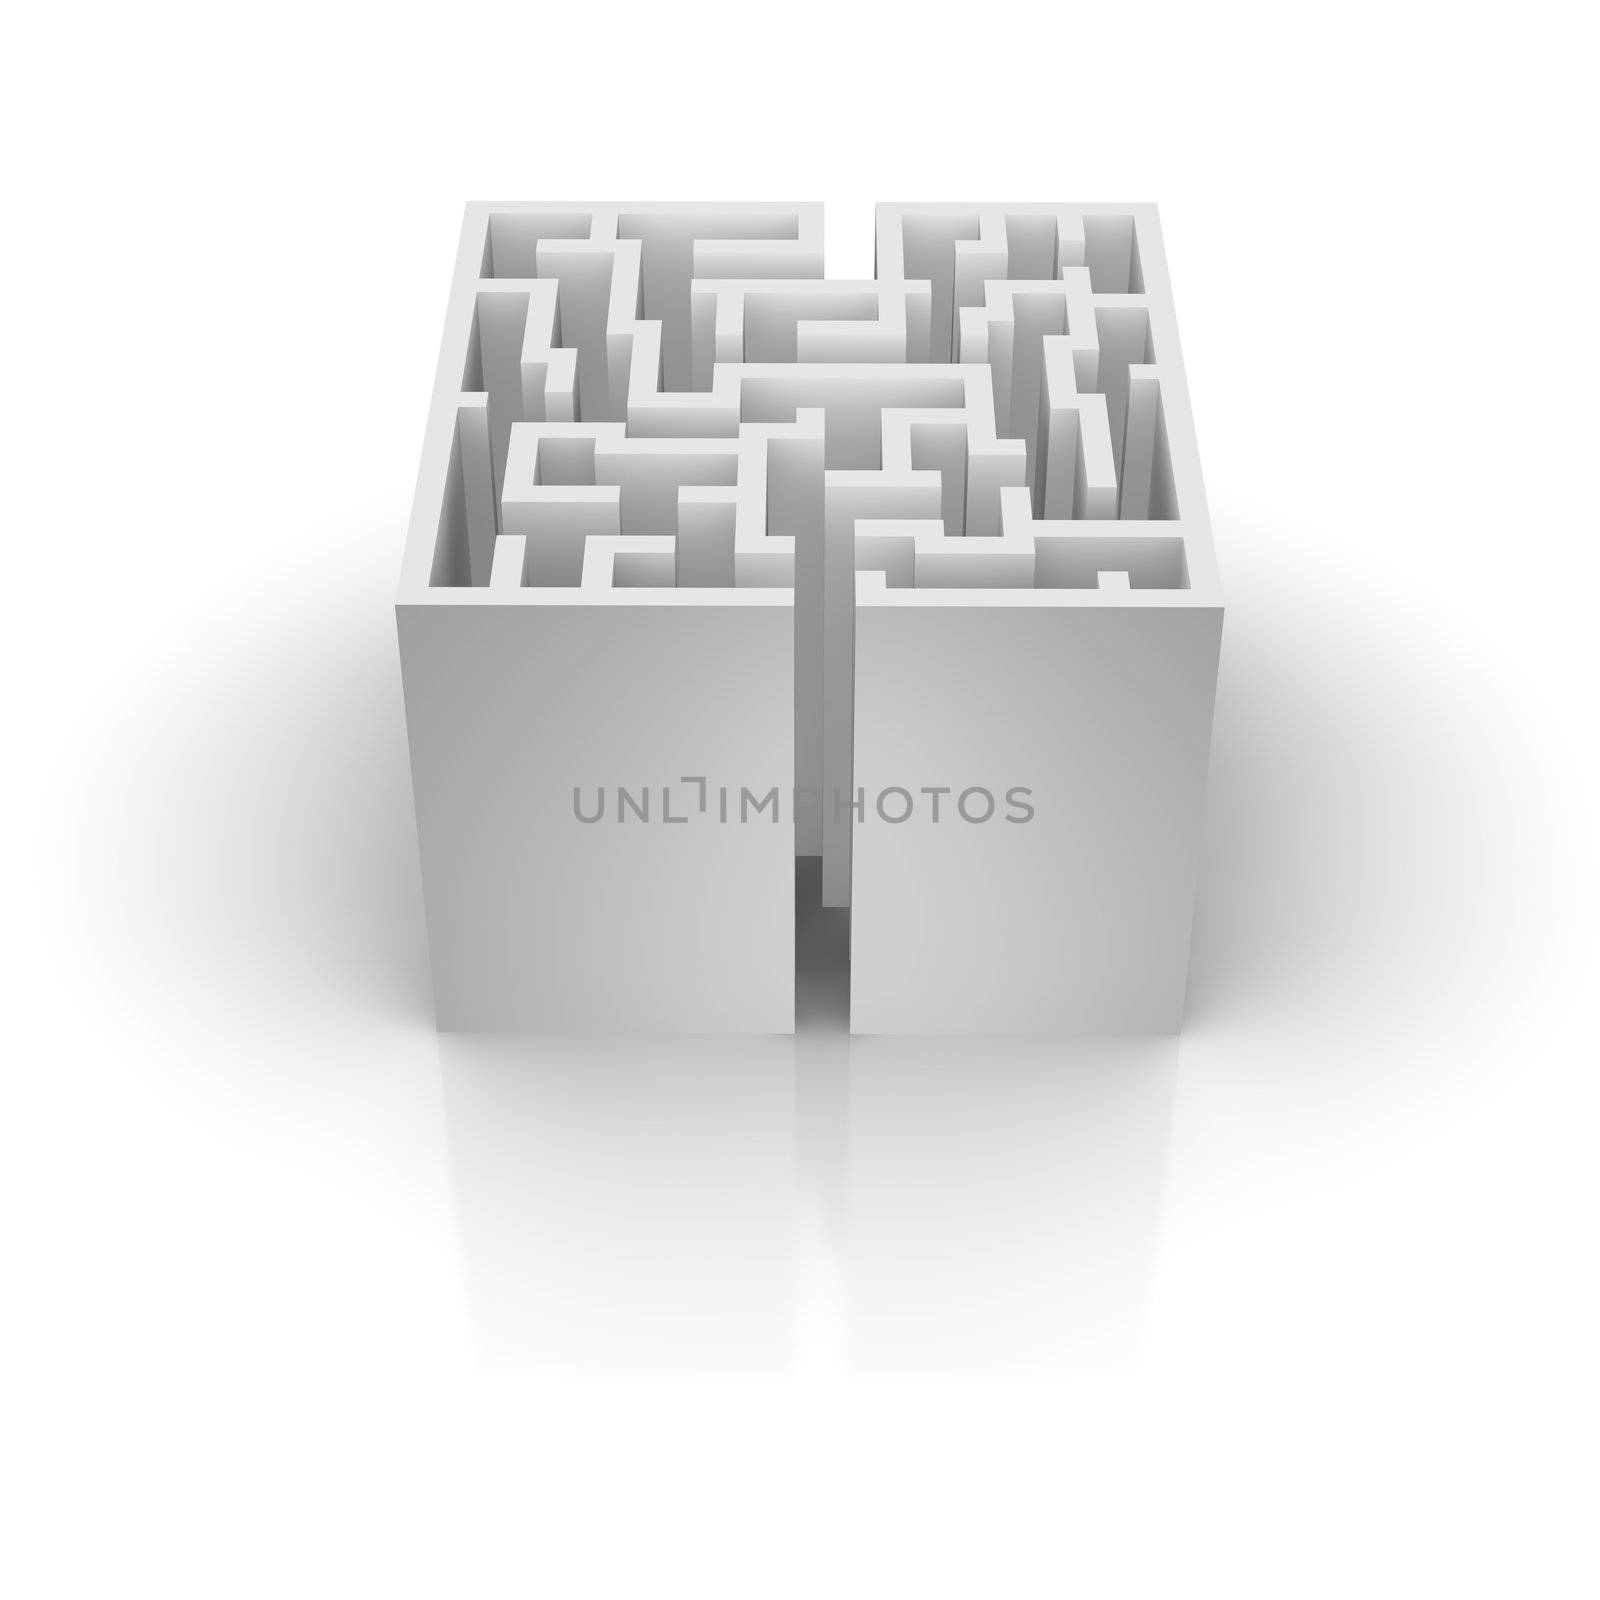 Isolated labyrinth with reflection. 3d rendered illustration.